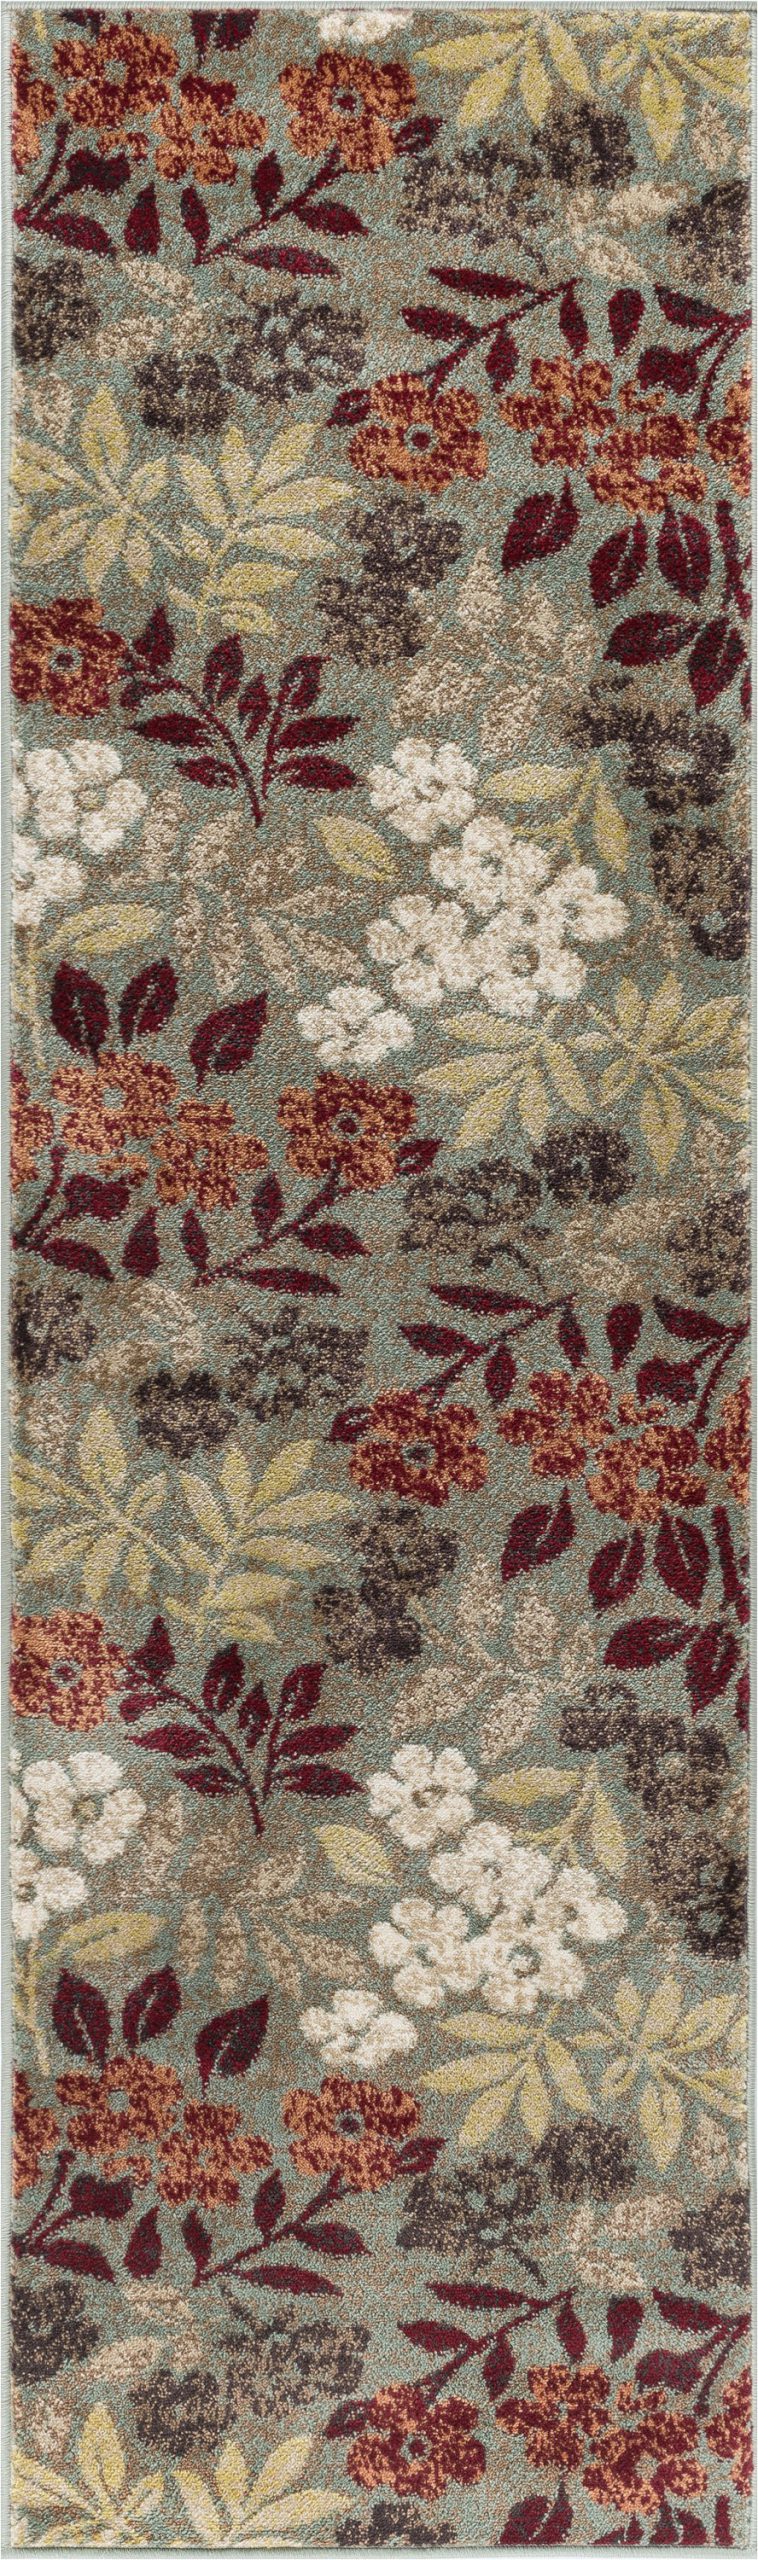 Better Homes and Gardens Suzani area Rug Bliss Rugs Kelsie Transitional Indoor area Rug